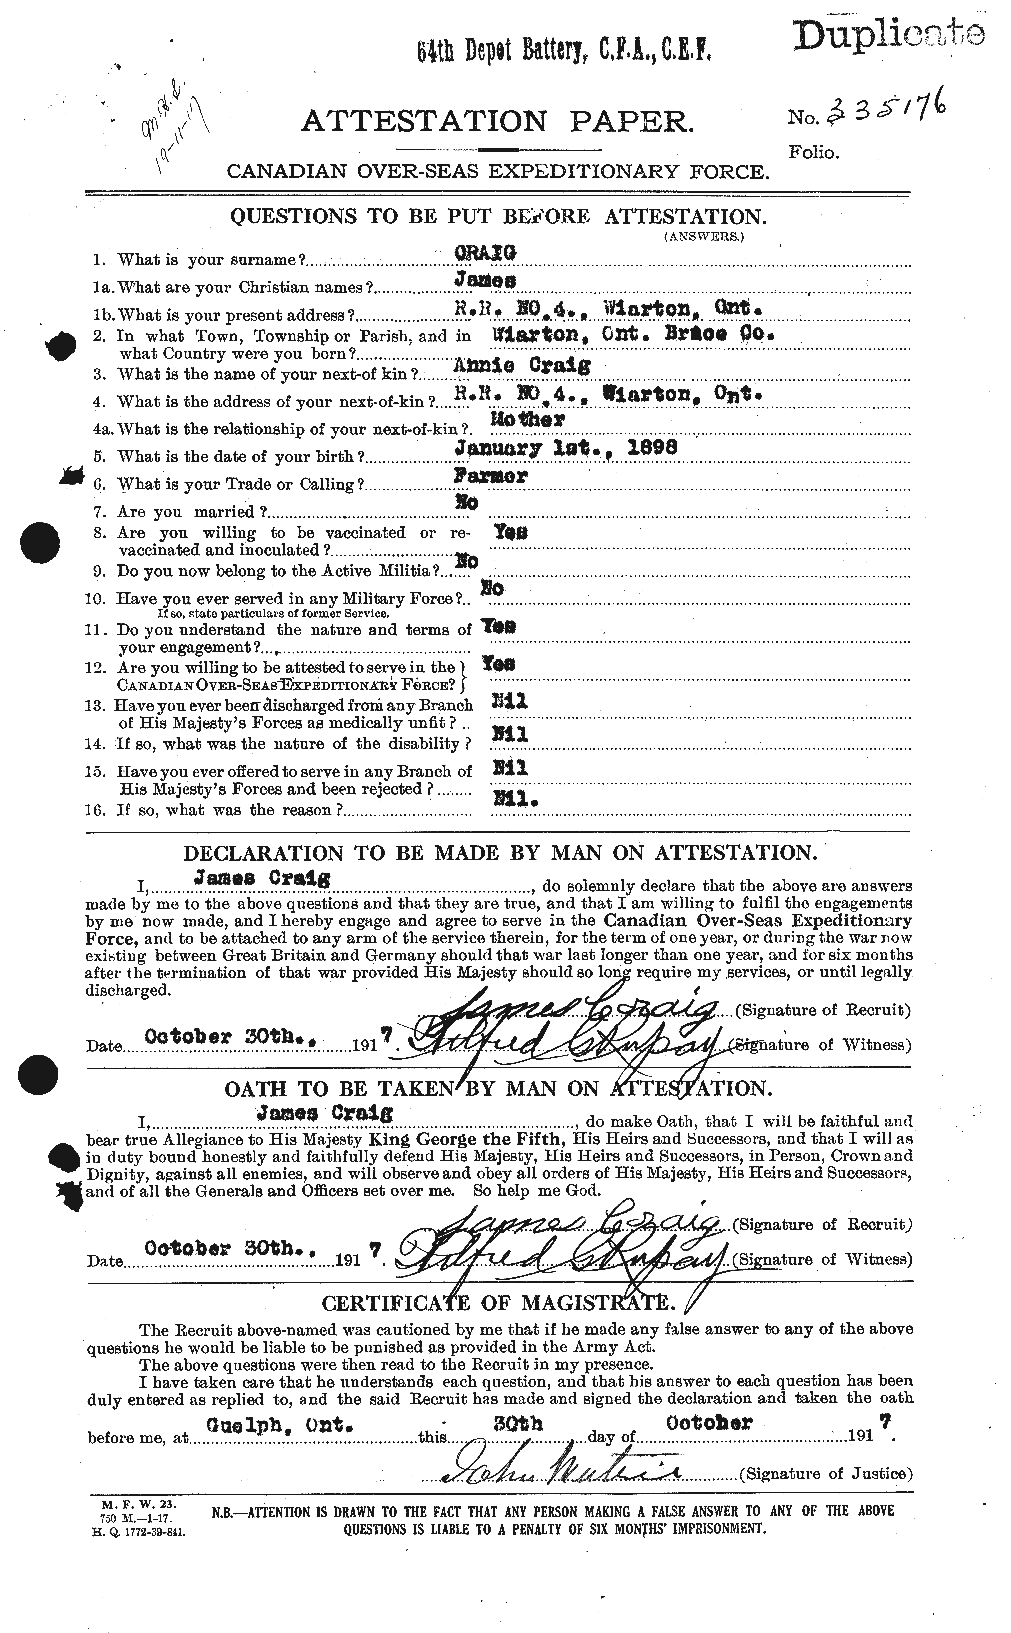 Personnel Records of the First World War - CEF 061672a